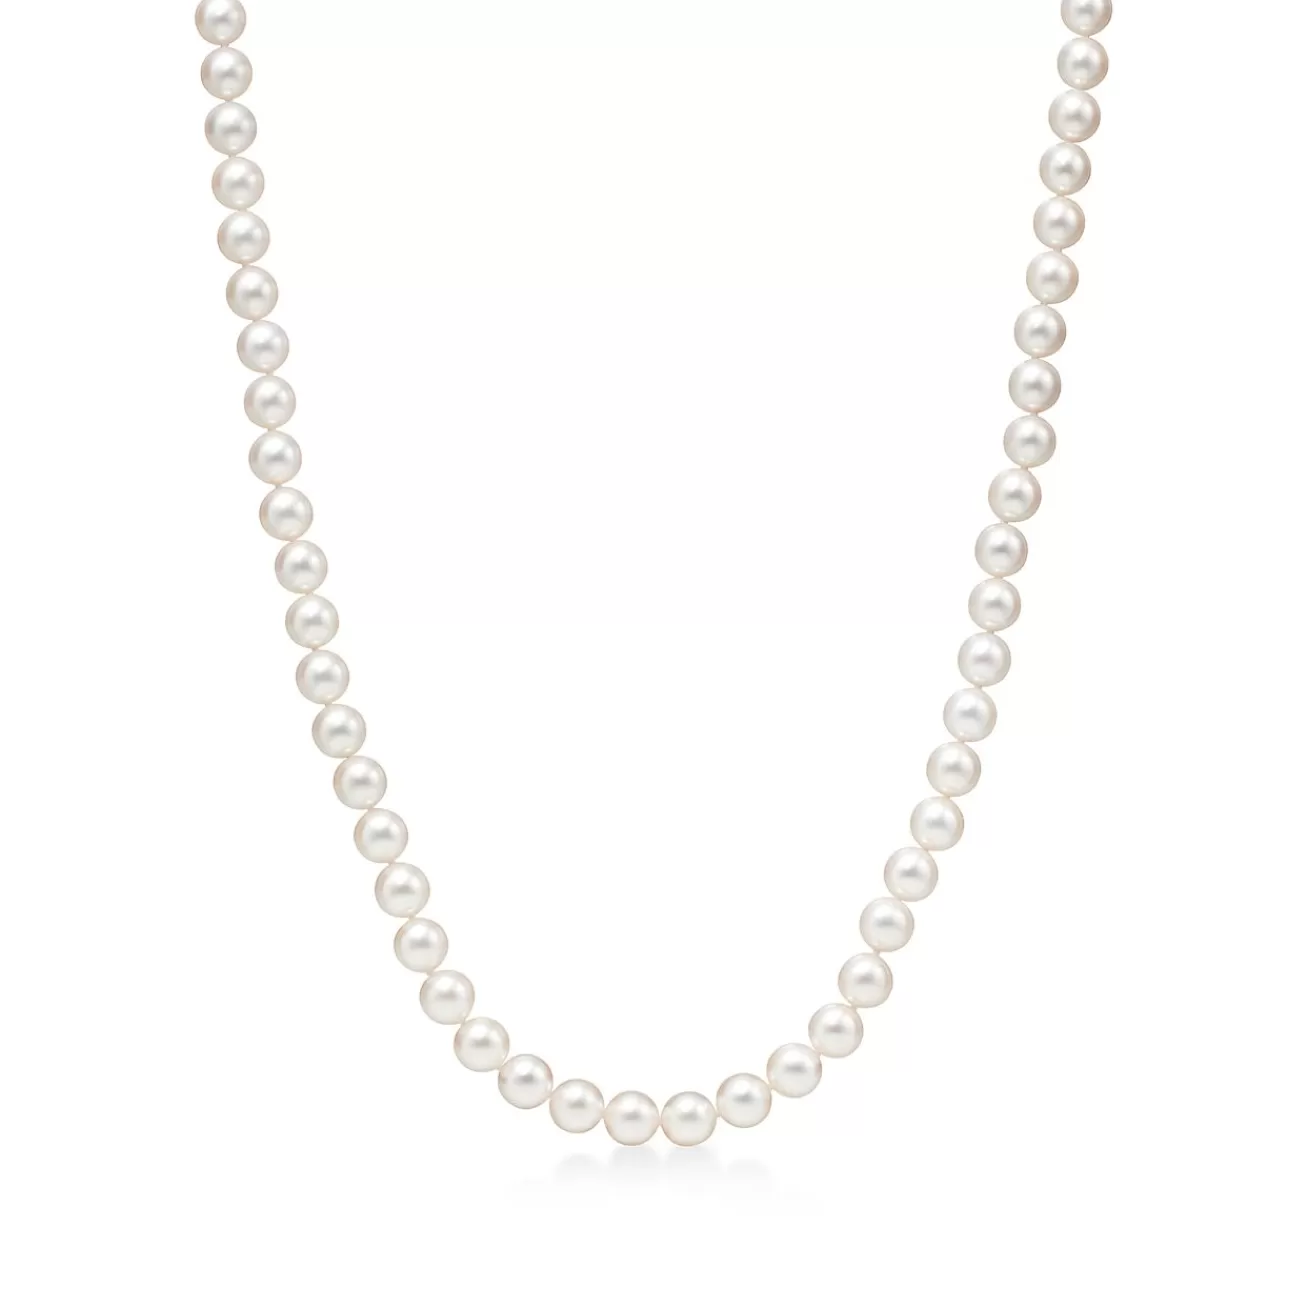 Tiffany & Co. Tiffany Essential Pearls necklace of Akoya pearls with an 18k white gold clasp. | ^ Necklaces & Pendants | Gifts for Her